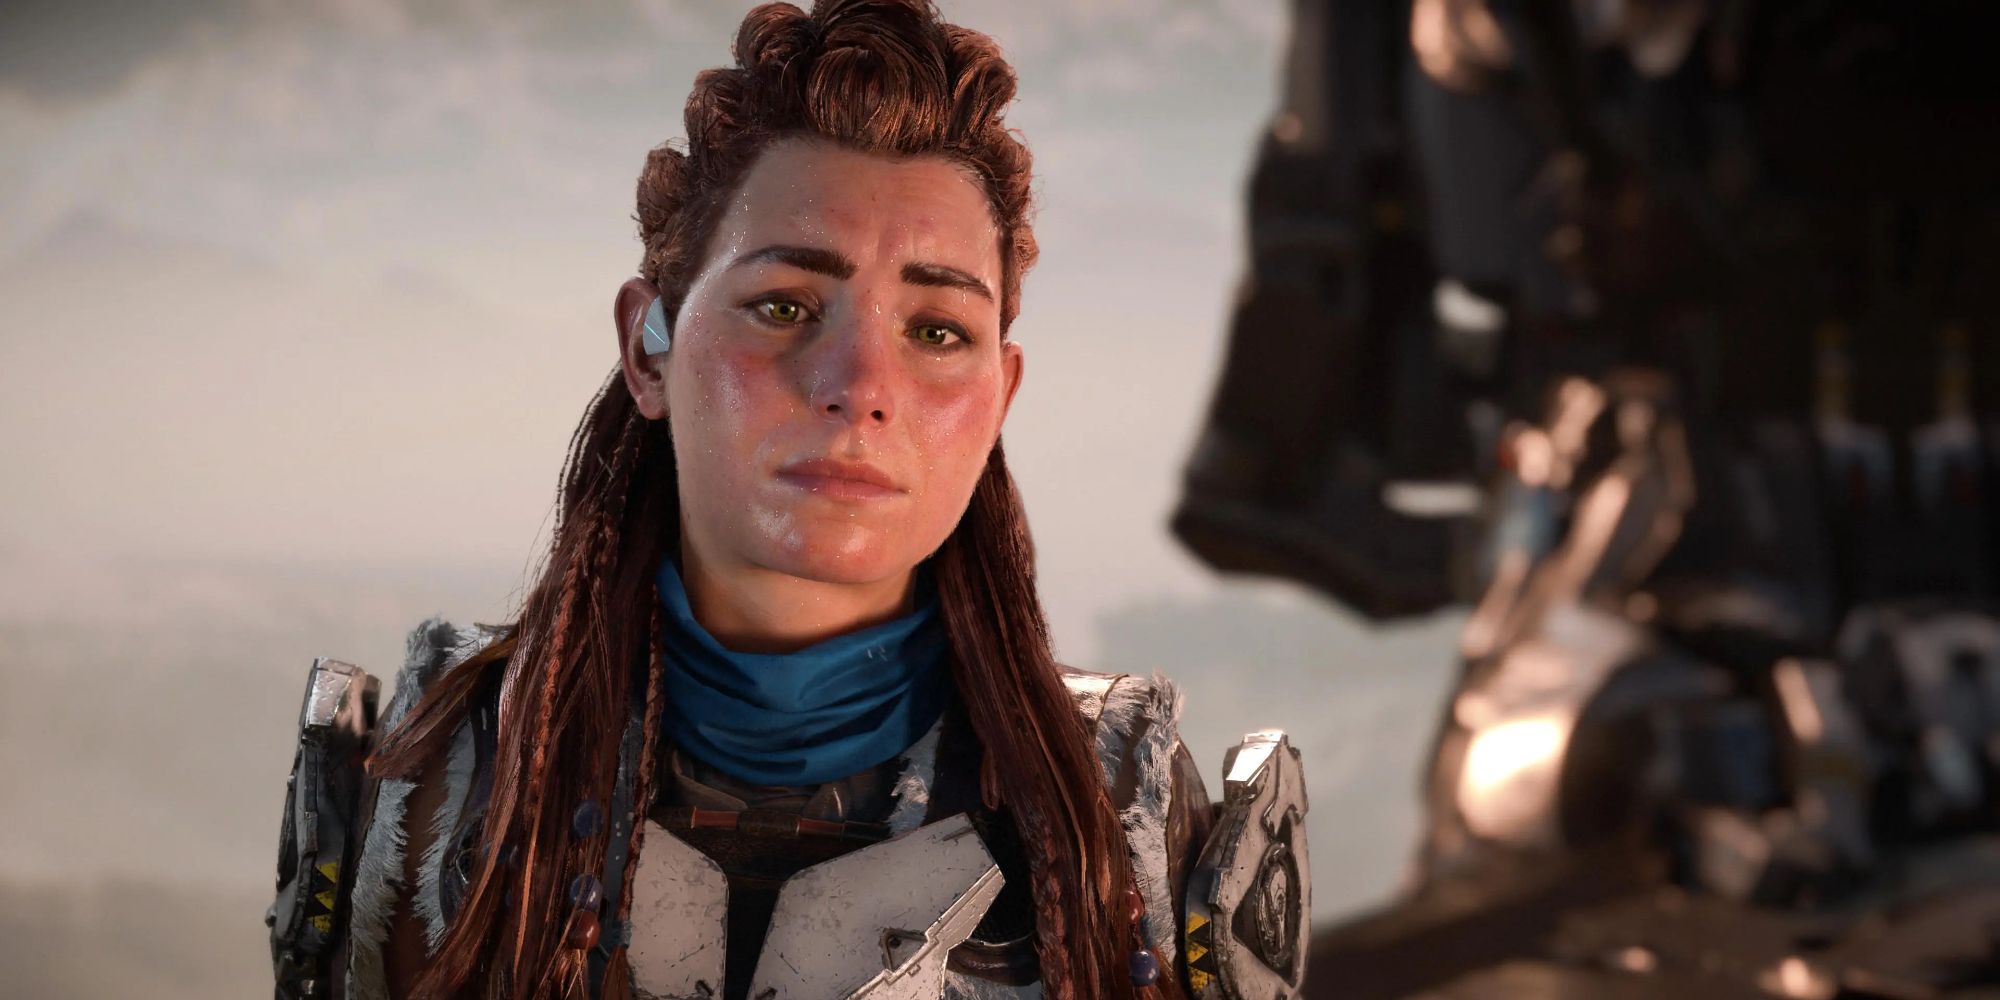 Does Horizon Zero Dawn need to be played before its more recent sequel, Horizon Forbidden West?